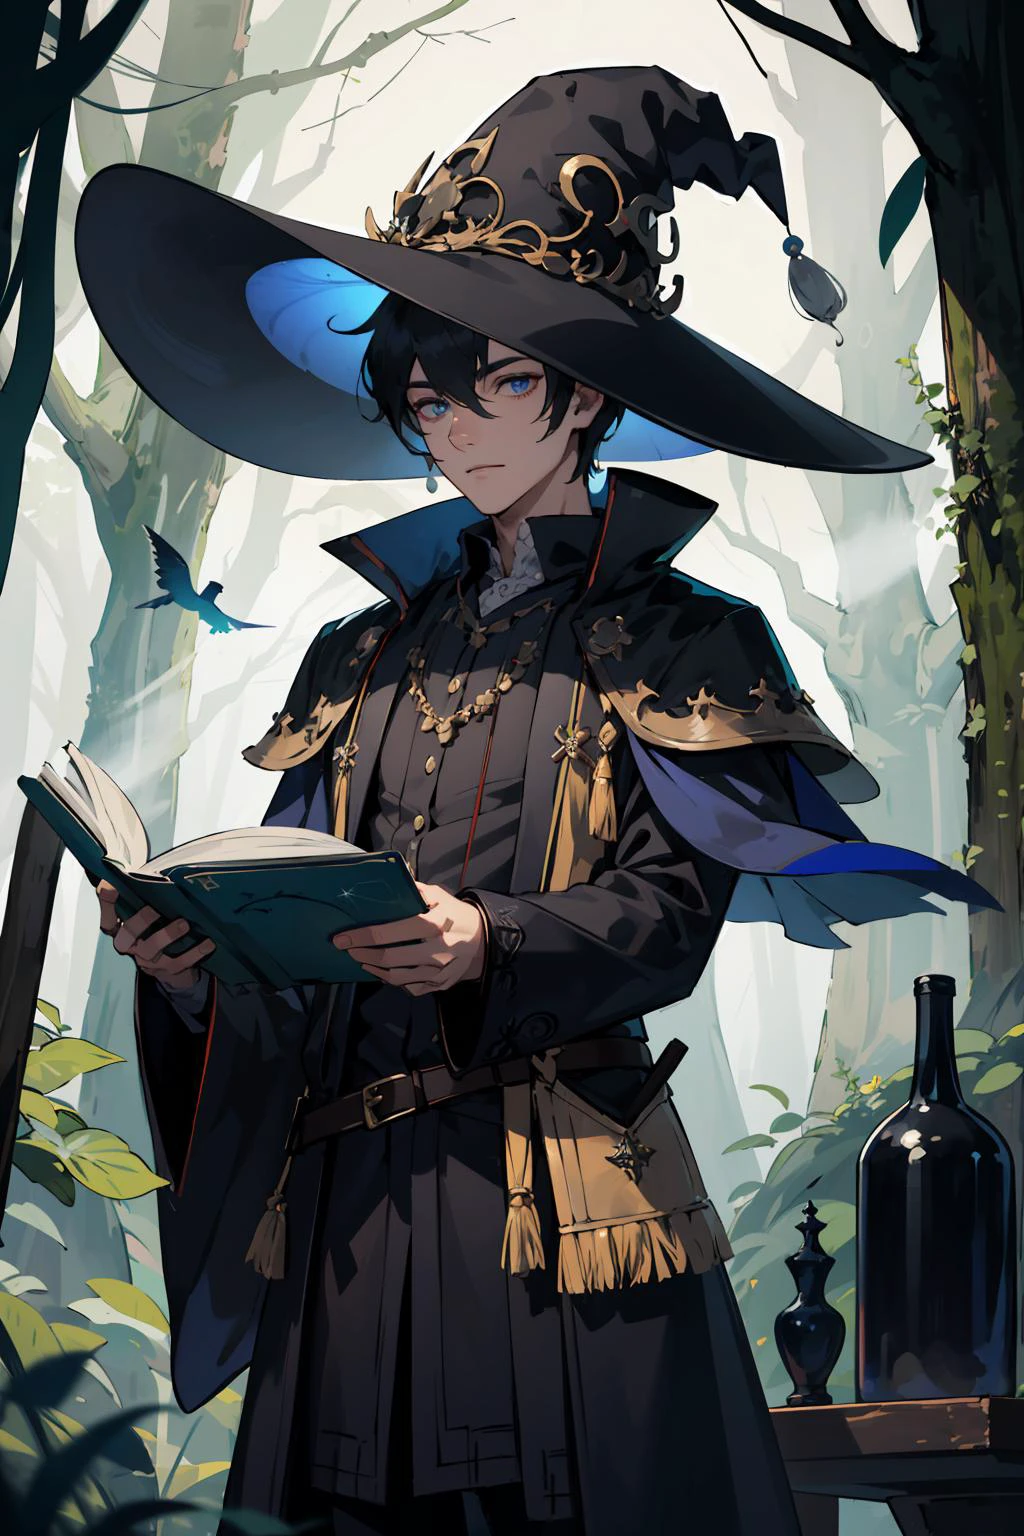 masterpiece, best quality, 1 male, adult, tall muscular, handsome, finely detailed eyes, intricate details, wizard, black hat with a pointed brim, broomstick with a carved handle, spellbook with a variety of spells, potion bottles with various ingredients, enchanted forest with a hidden wizard hut, forest